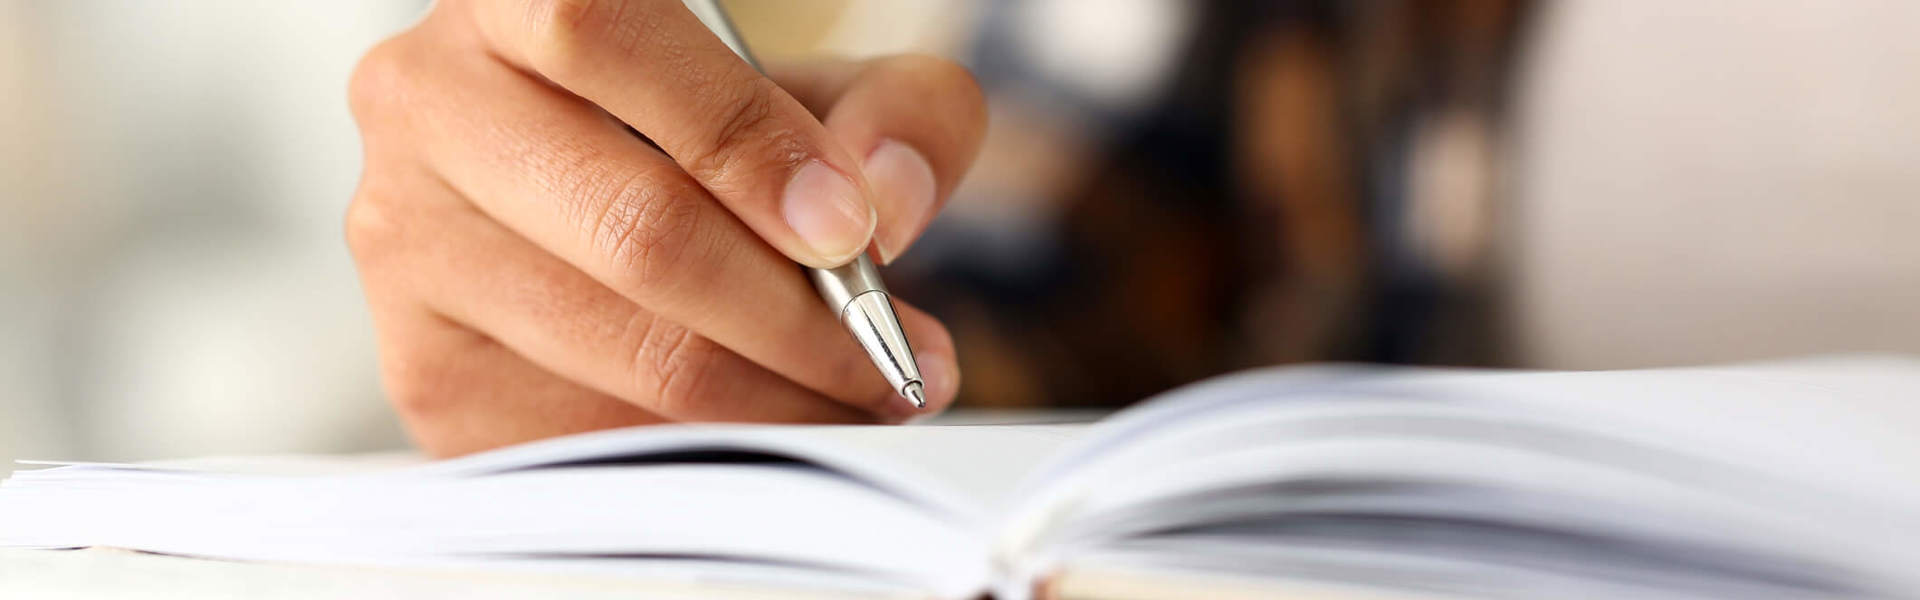 a close up of someone holding a pen and writing in a journal